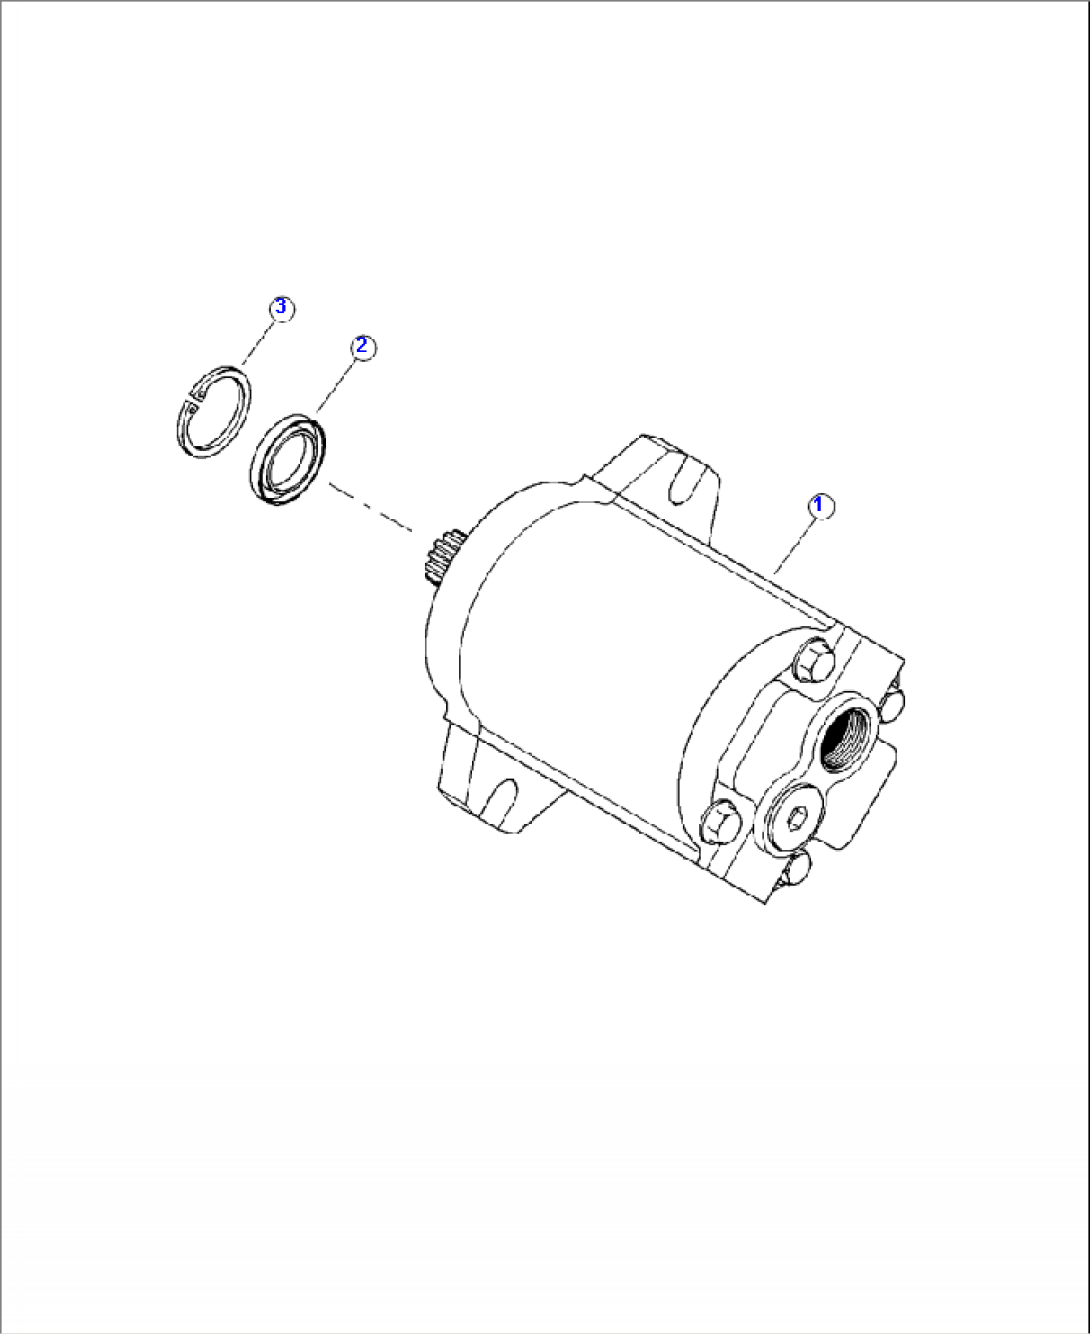 H0249-01A0 CHARGE PUMP SEAL